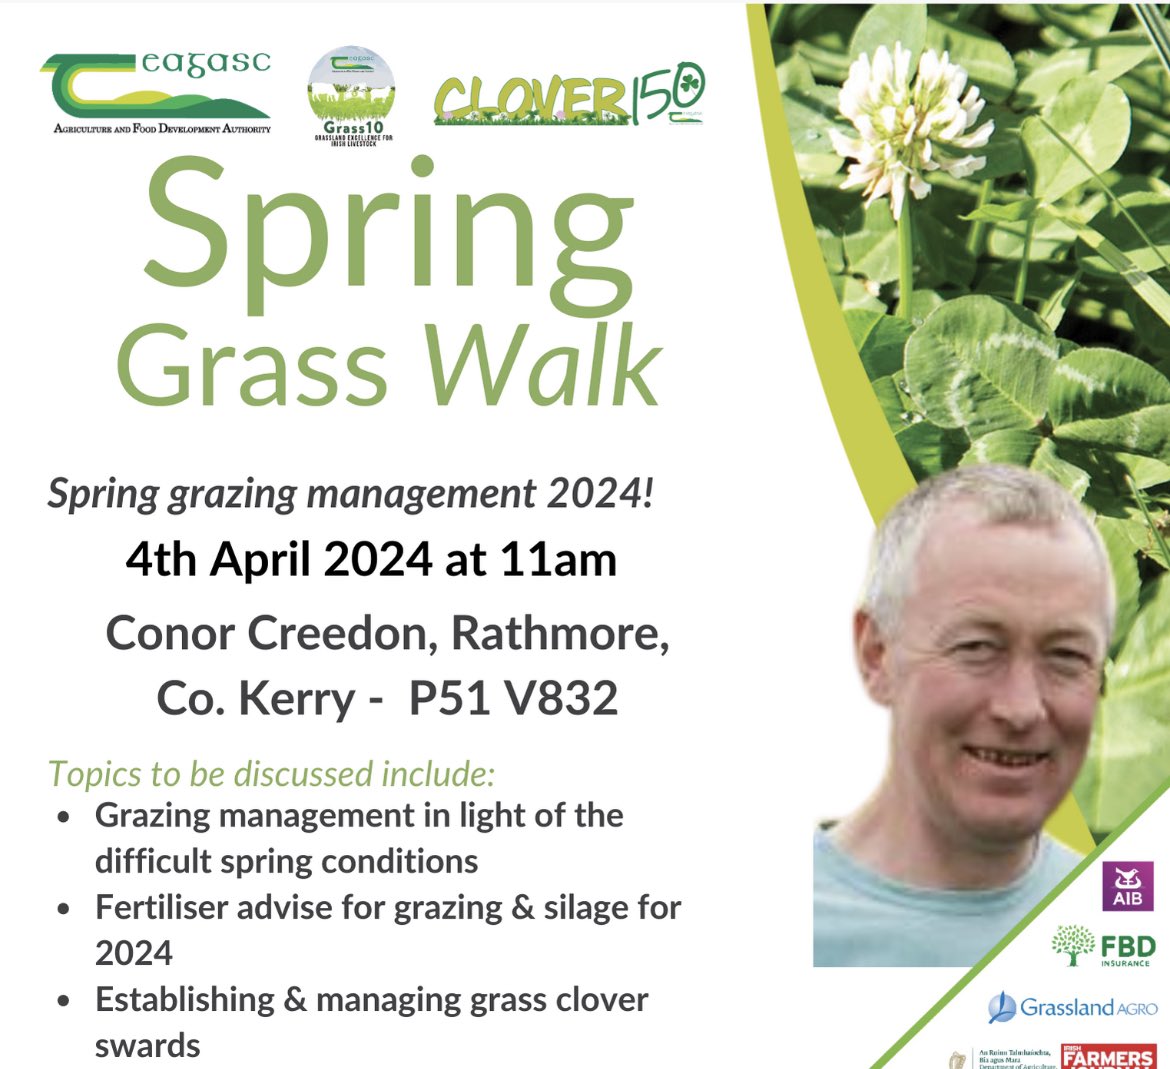 Spring Grass Walk kicks off at 11am here on Conor Creedons, Rathmore, Co. Kerry 🌱🐄 @TeagascKyLk